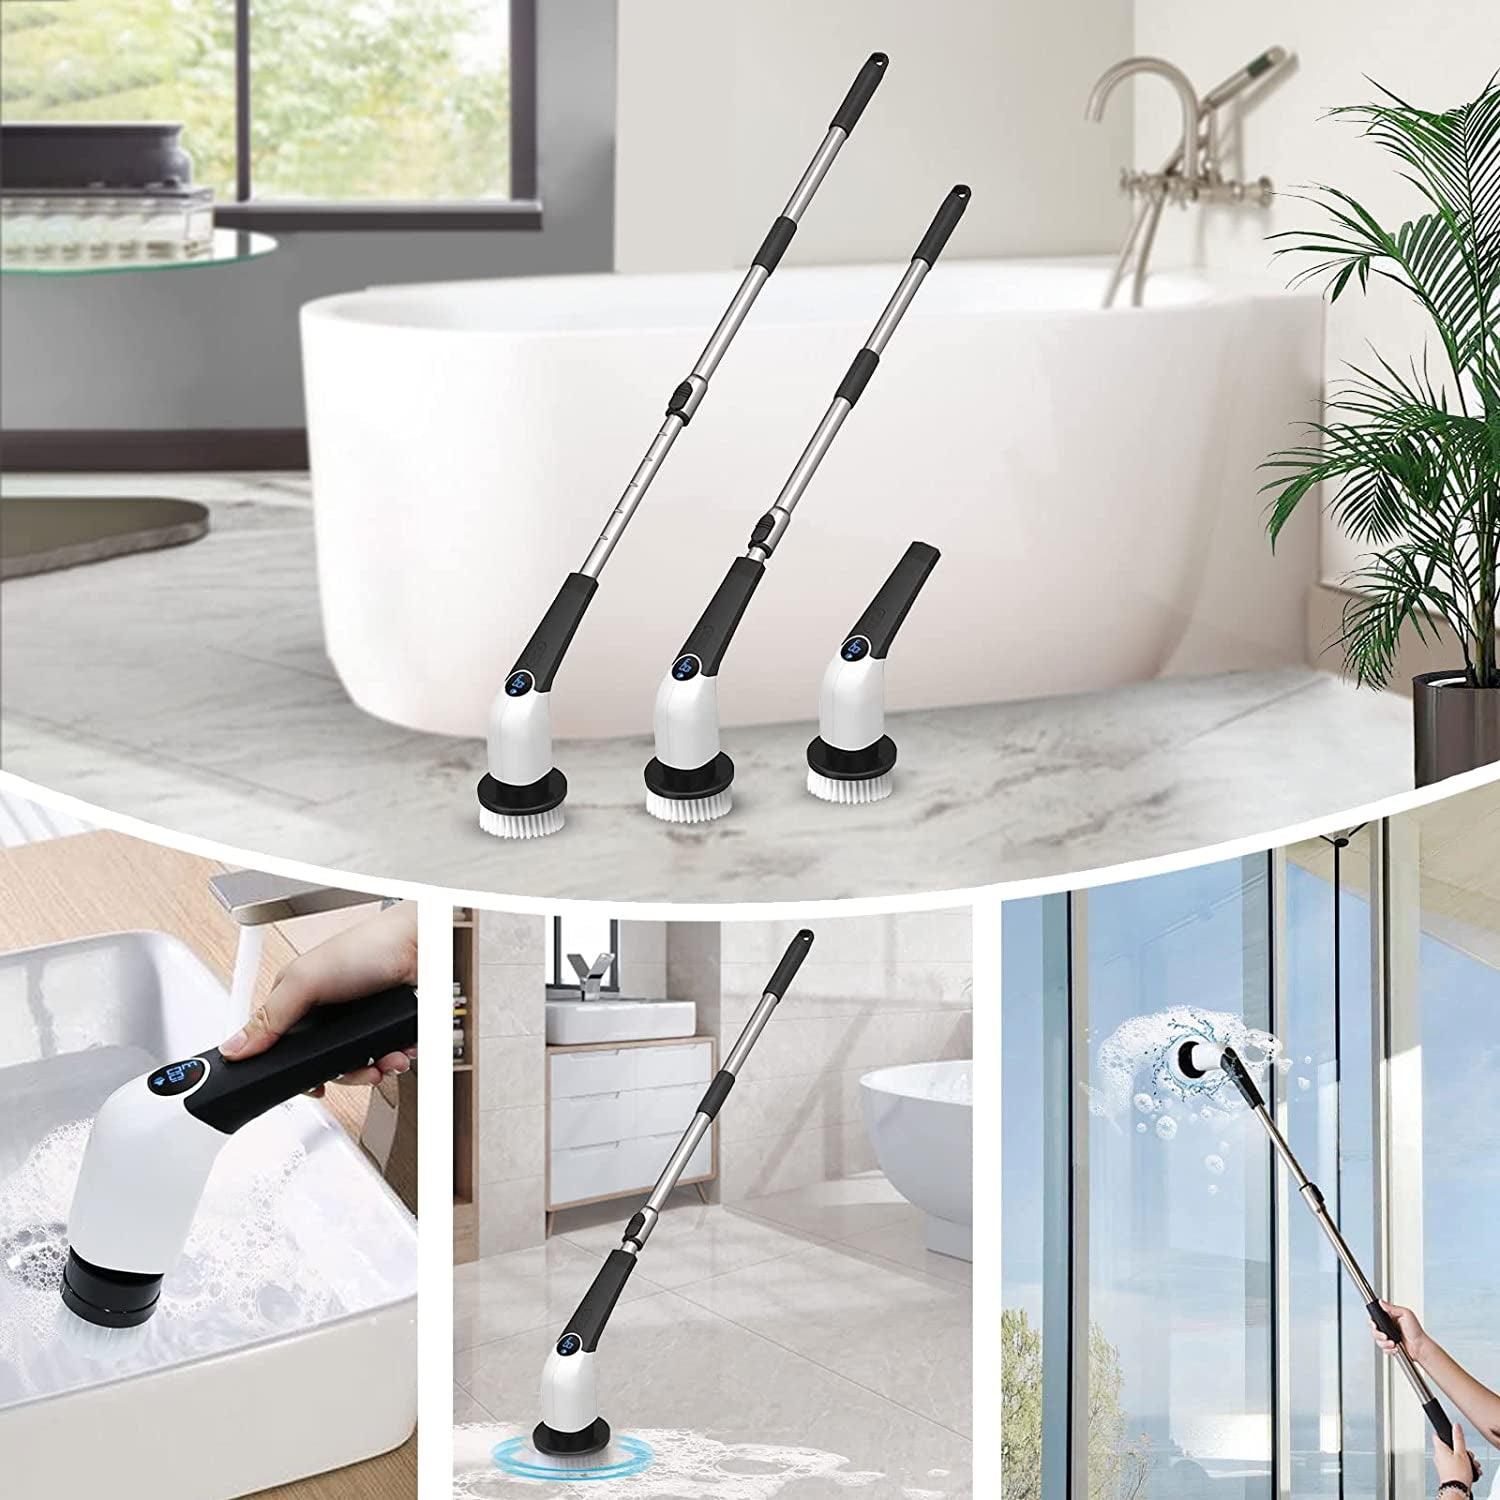 Electric Spin Scrubber,  Shower Scrubber with LED Screen, Power Shower Scrubber for Bathroom, Kitchen, Floor, Tile, Tub with 12-45 in Adjustable Extension Arm and 8 Replaceable Drill Brush Heads